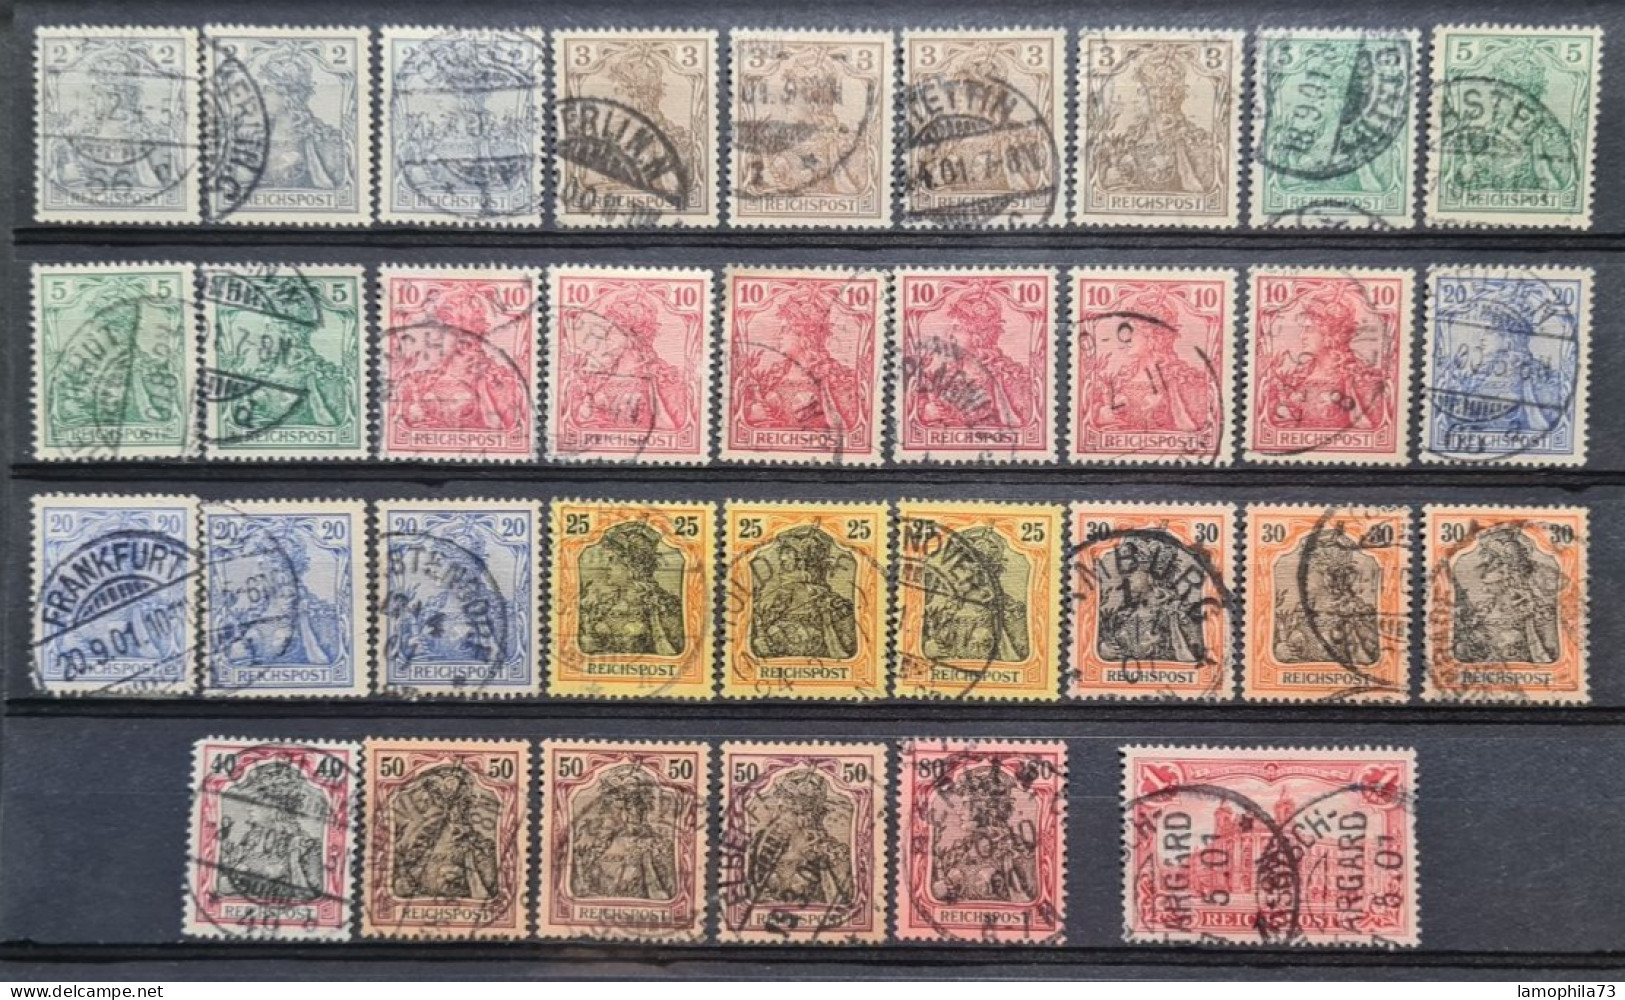 Allemagne Reichpost - Stamp(s) (O) - TB - 1 Scan(s) Réf-2321 - Used Stamps